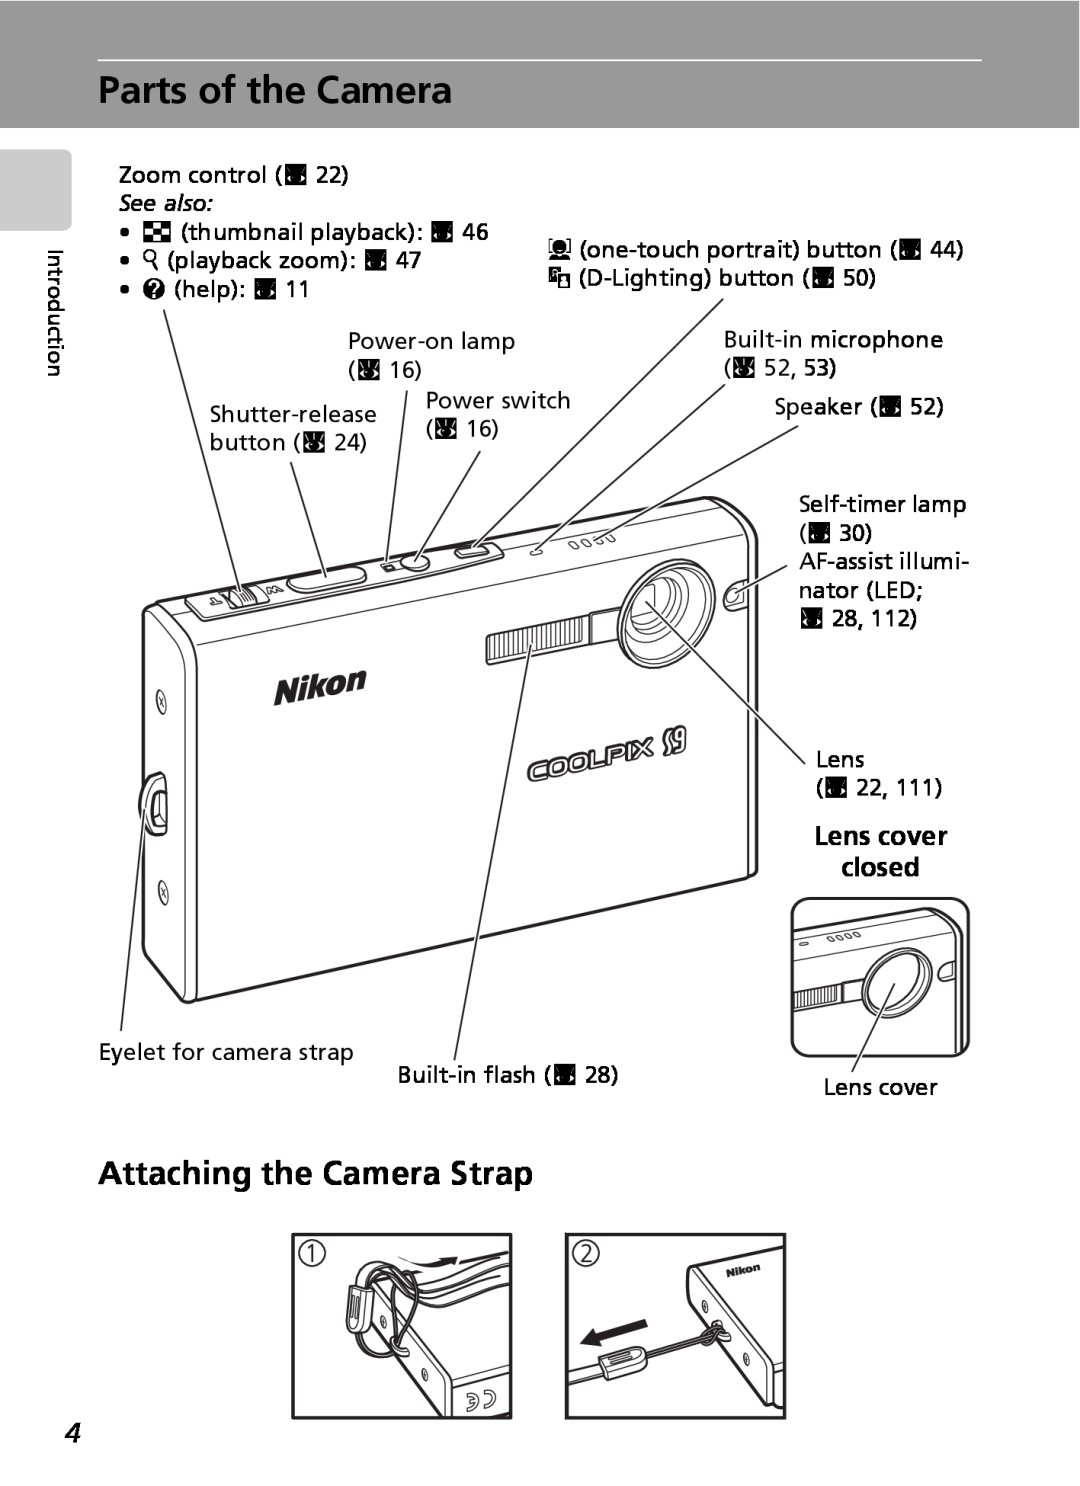 Nikon COOLPIXS9 manual Parts of the Camera, Attaching the Camera Strap, Lens cover closed, See also 